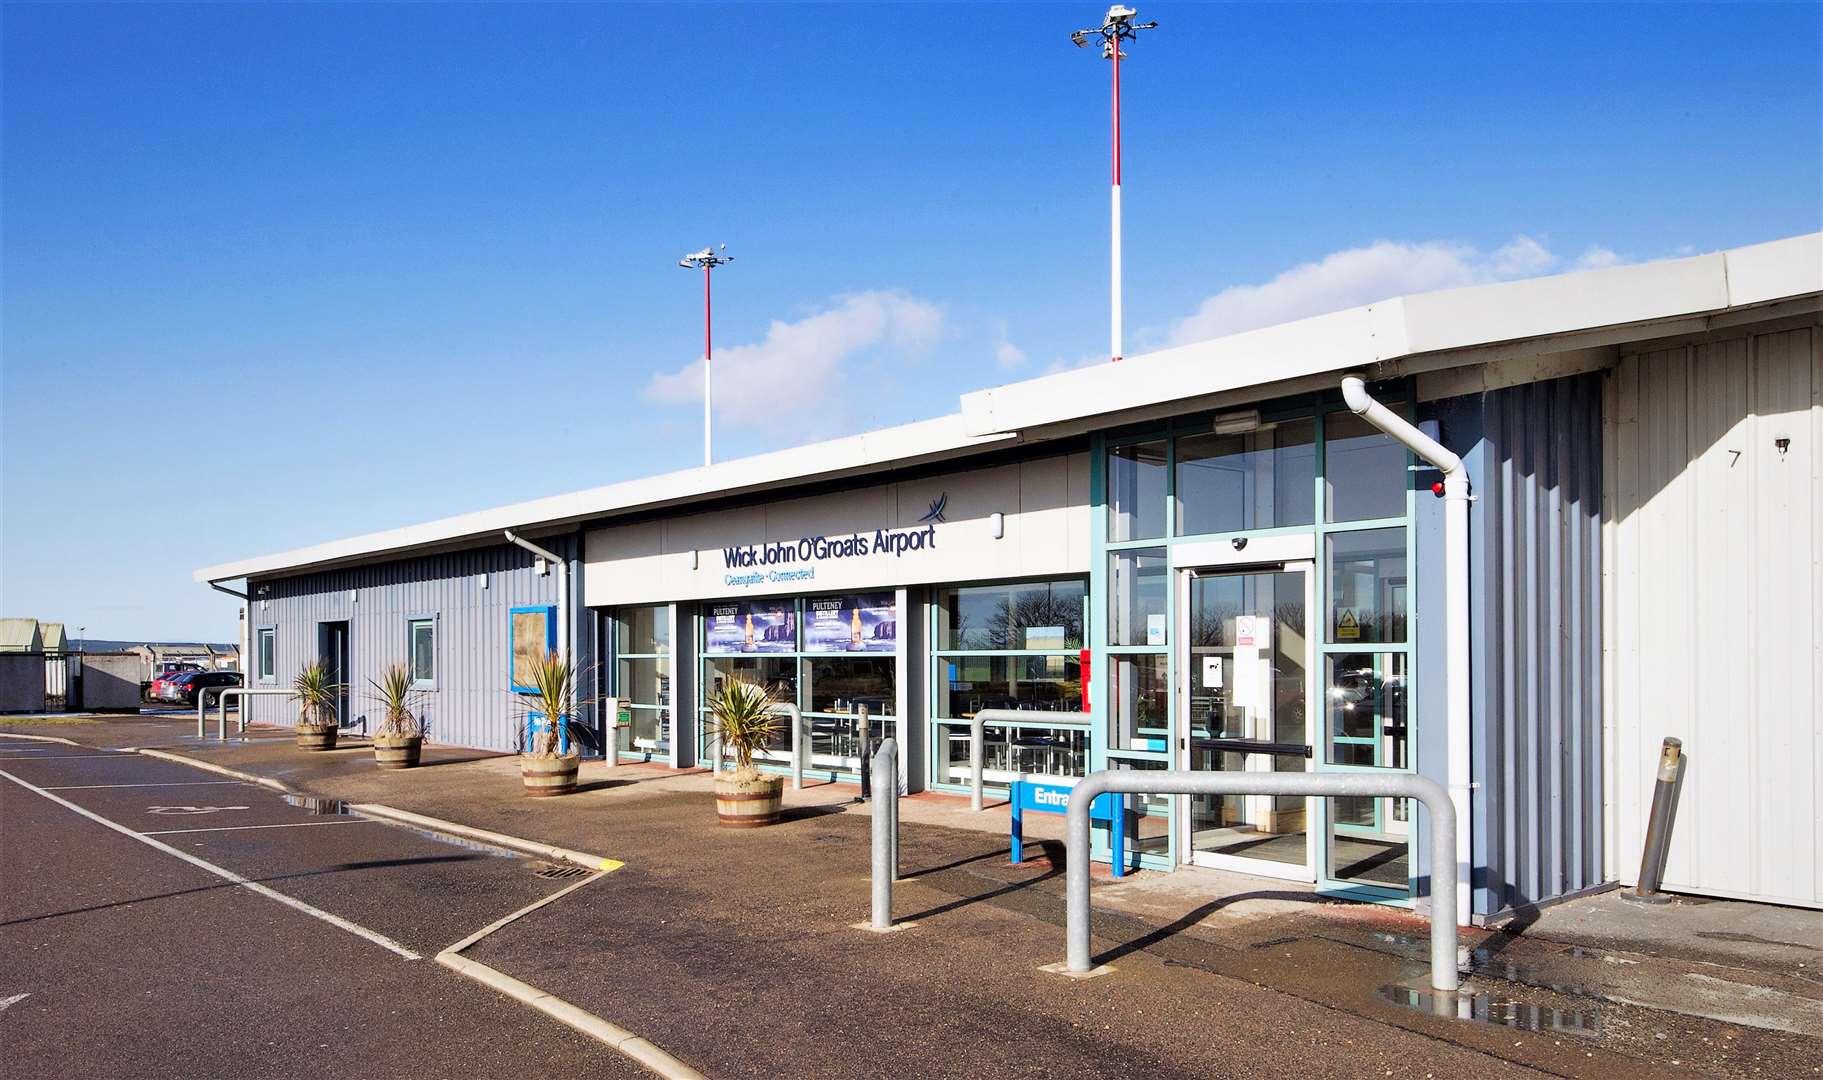 Air traffice services at Wick John O'Groats airport will be the subject of further separate talks between Hial and the Prospect Union.